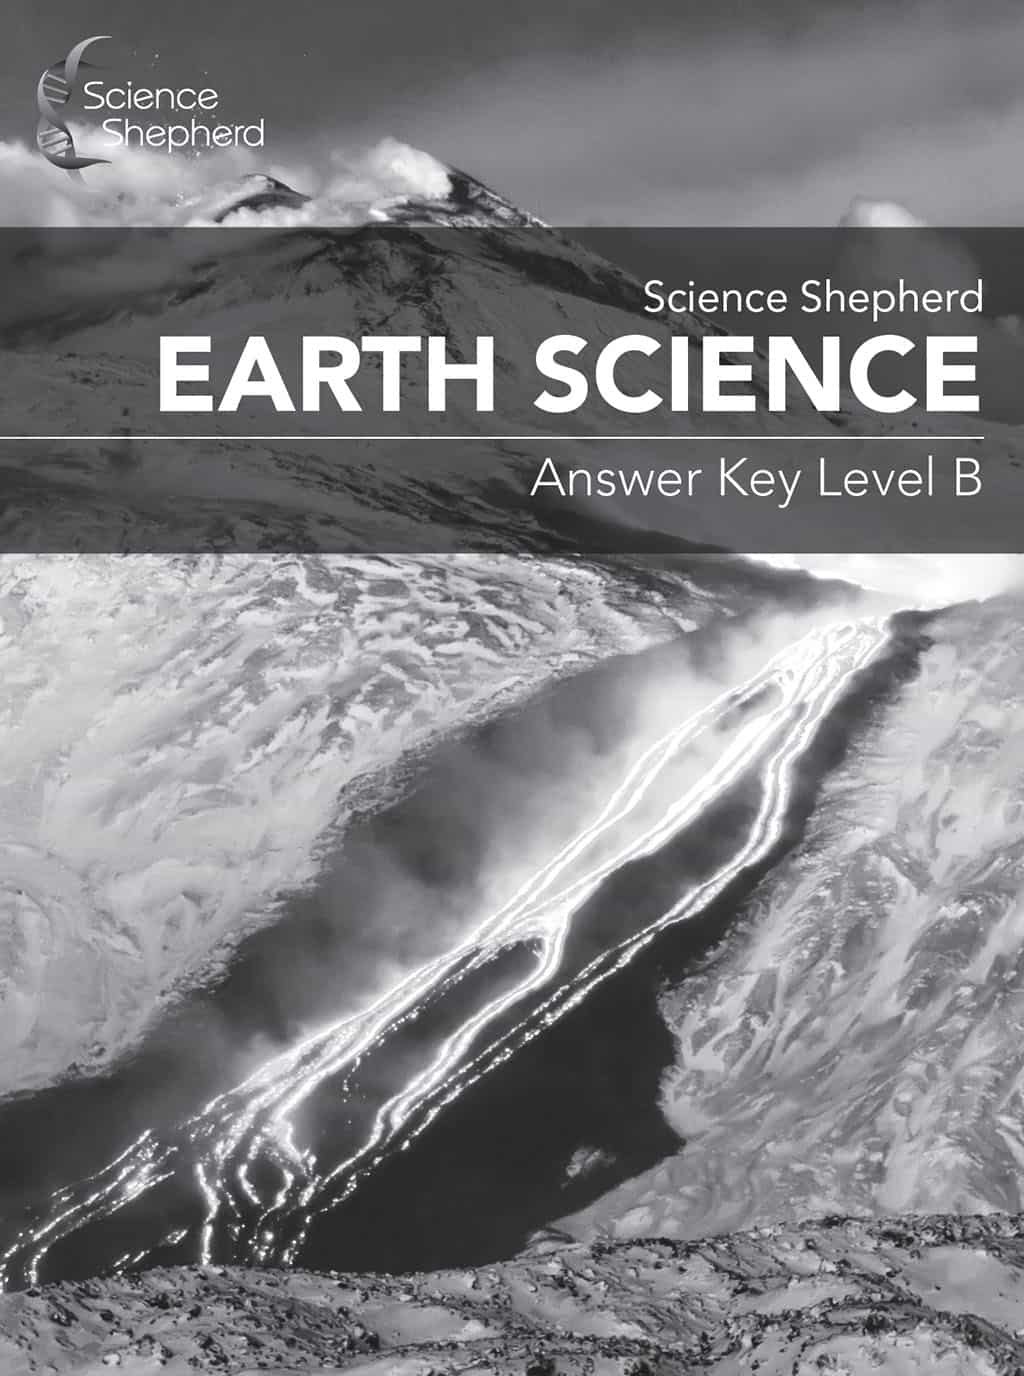 Earth Science for homeschool Answer Key Level B book cover of volcano and lava in grayscale